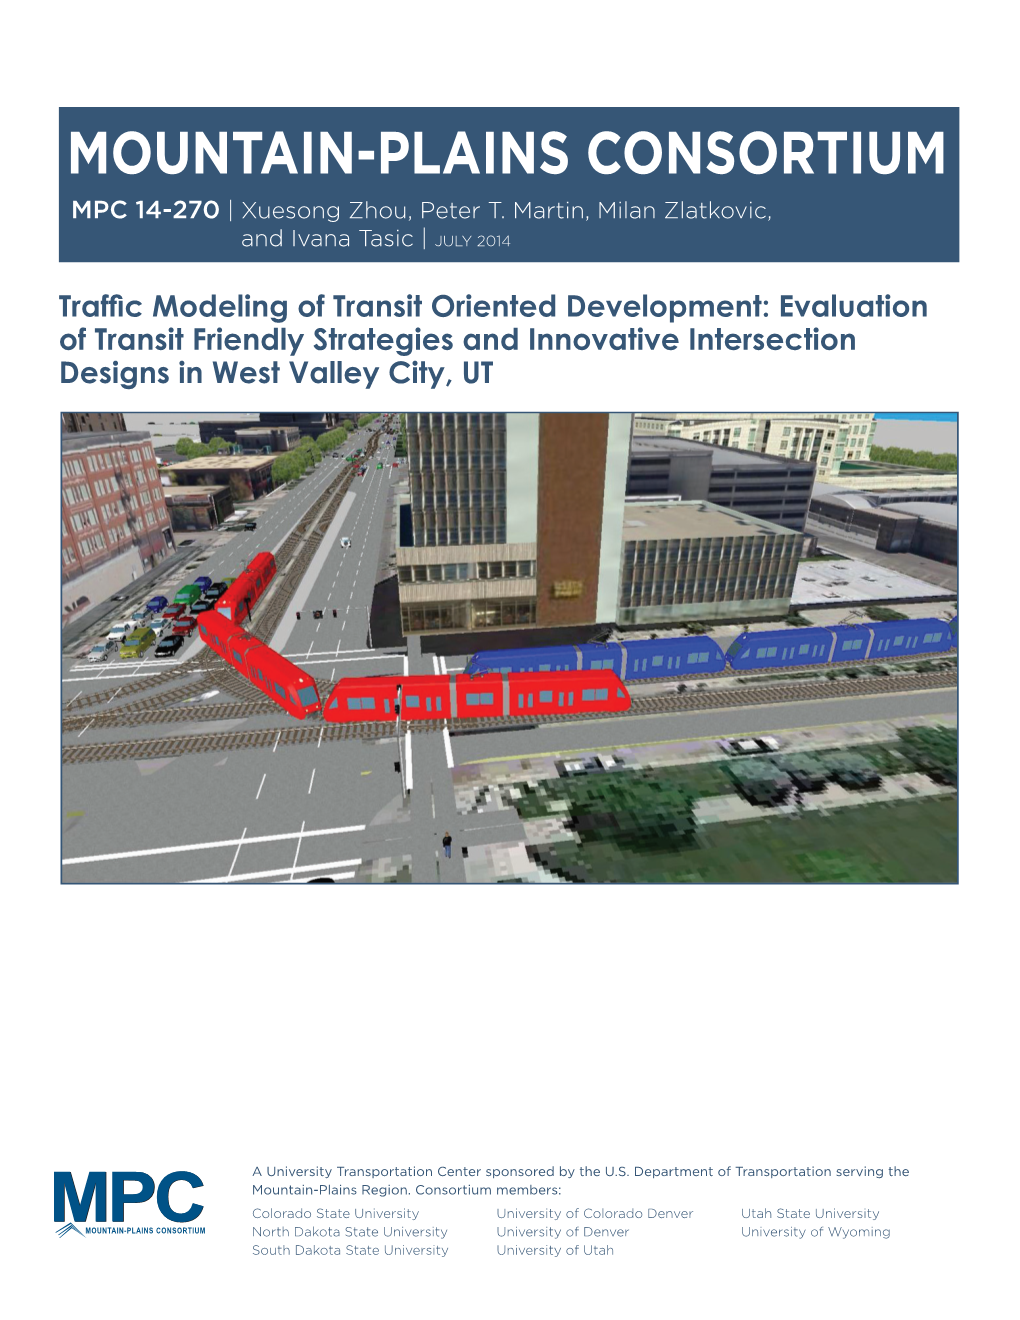 Traffic Modeling of Transit Oriented Development: Evaluation of Transit Friendly Strategies and Innovative Intersection Designs in West Valley City, UT